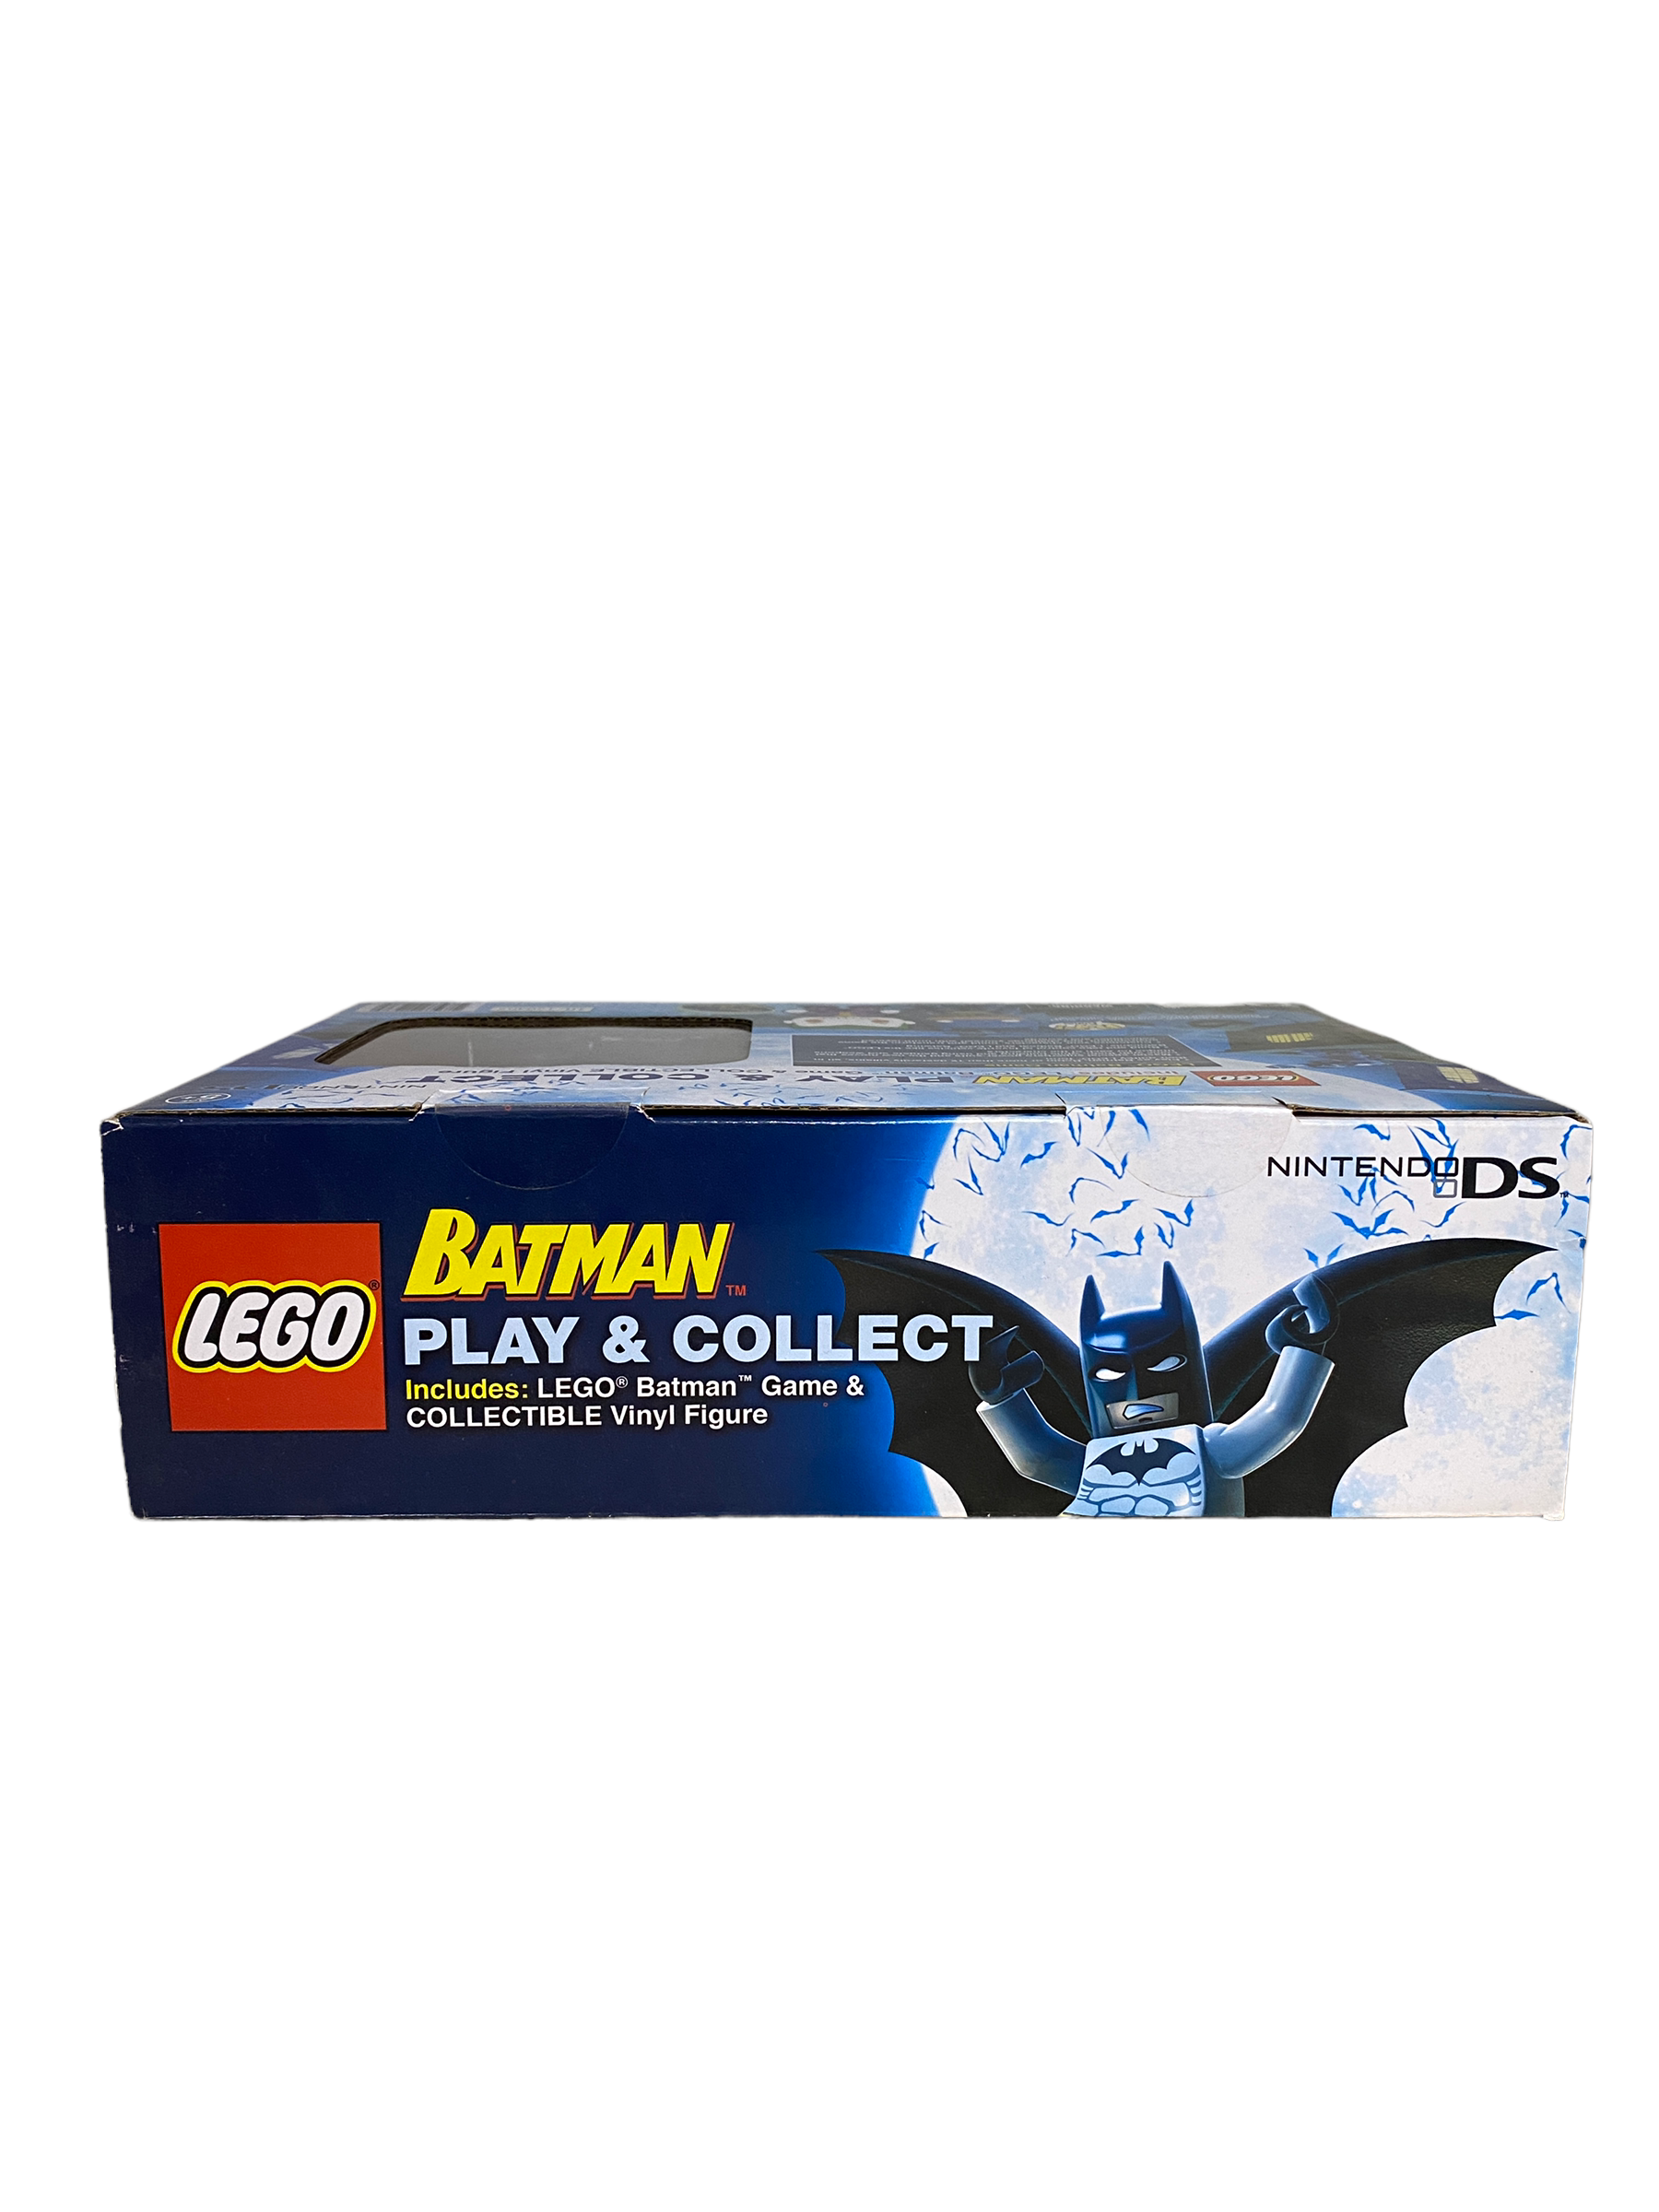 Lego Batman Play And Collect Nintendo DS (Glows In The Dark) Funko Pop Bundle! - Condition 8.5/10